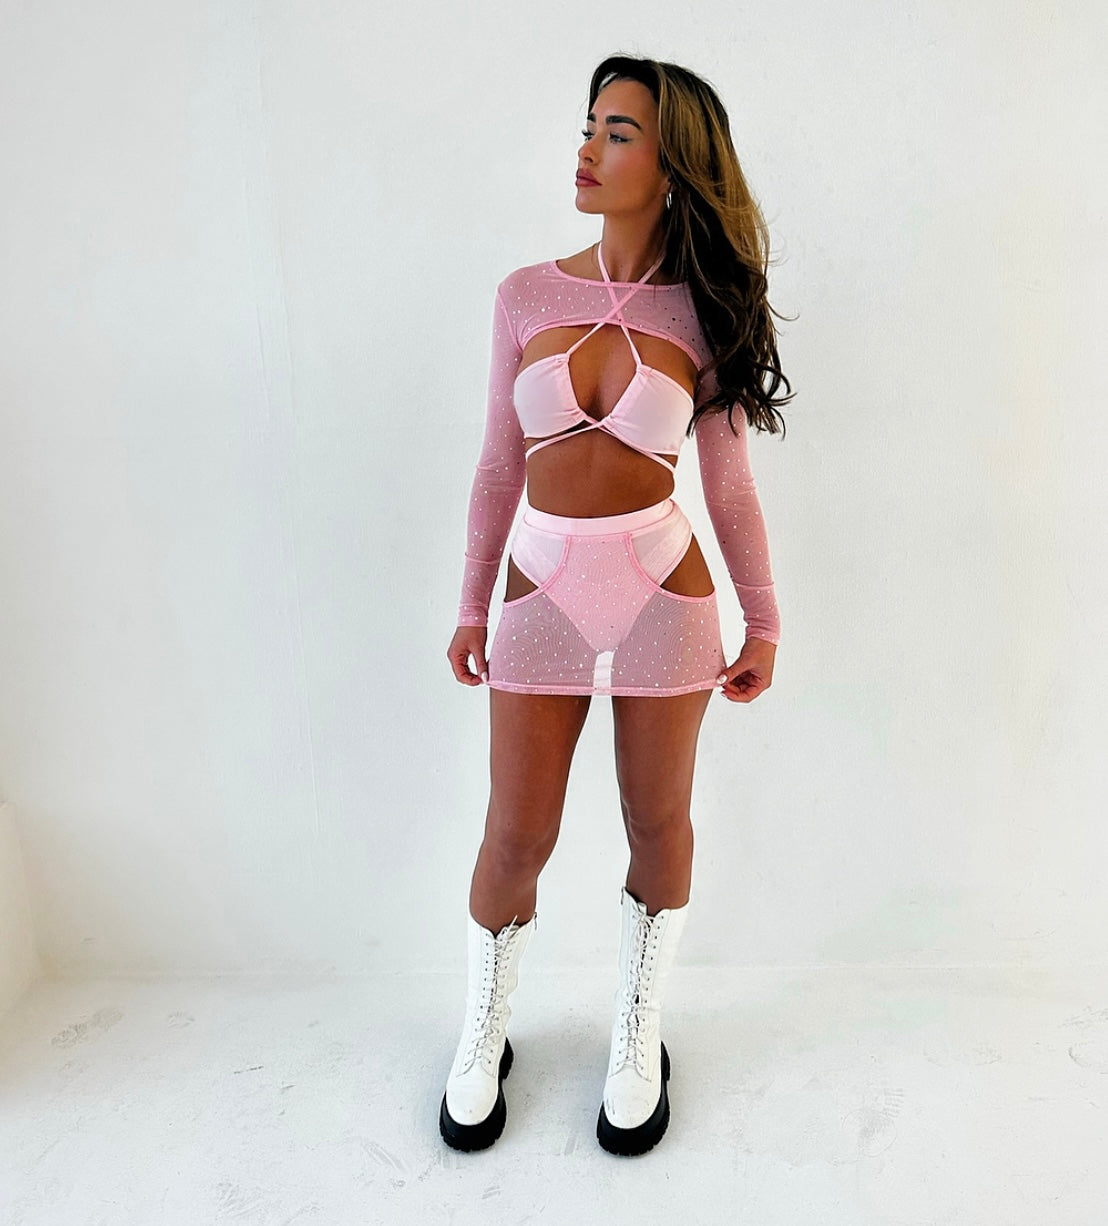 BABY PINK GLITTER FESTIVAL OUTFIT, RAVE OUTFIT, THREE PIECE